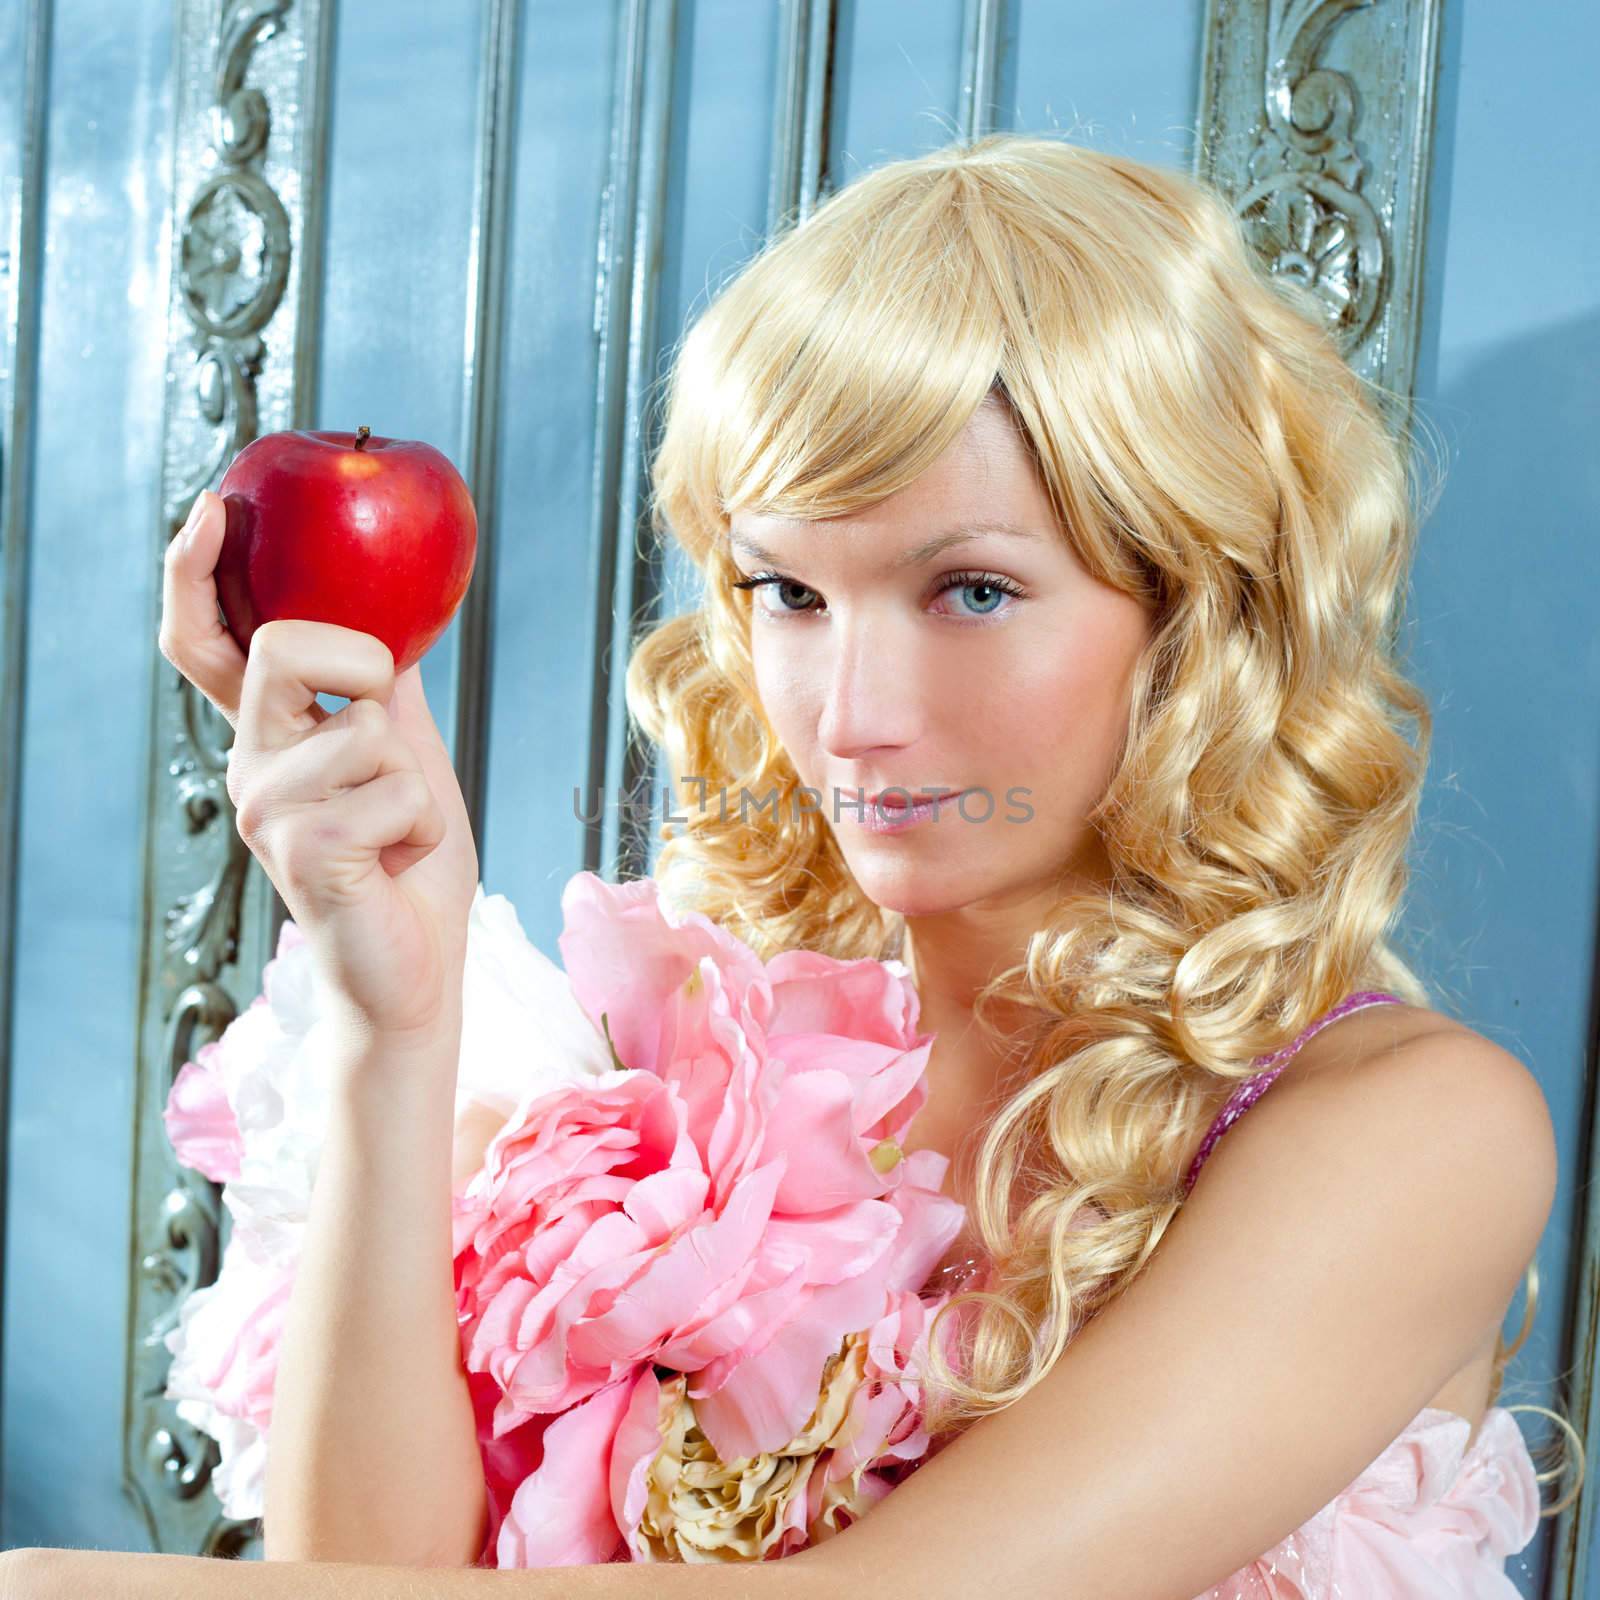 blond fashion princess eating apple with spring flowers dress on blue wardrobe